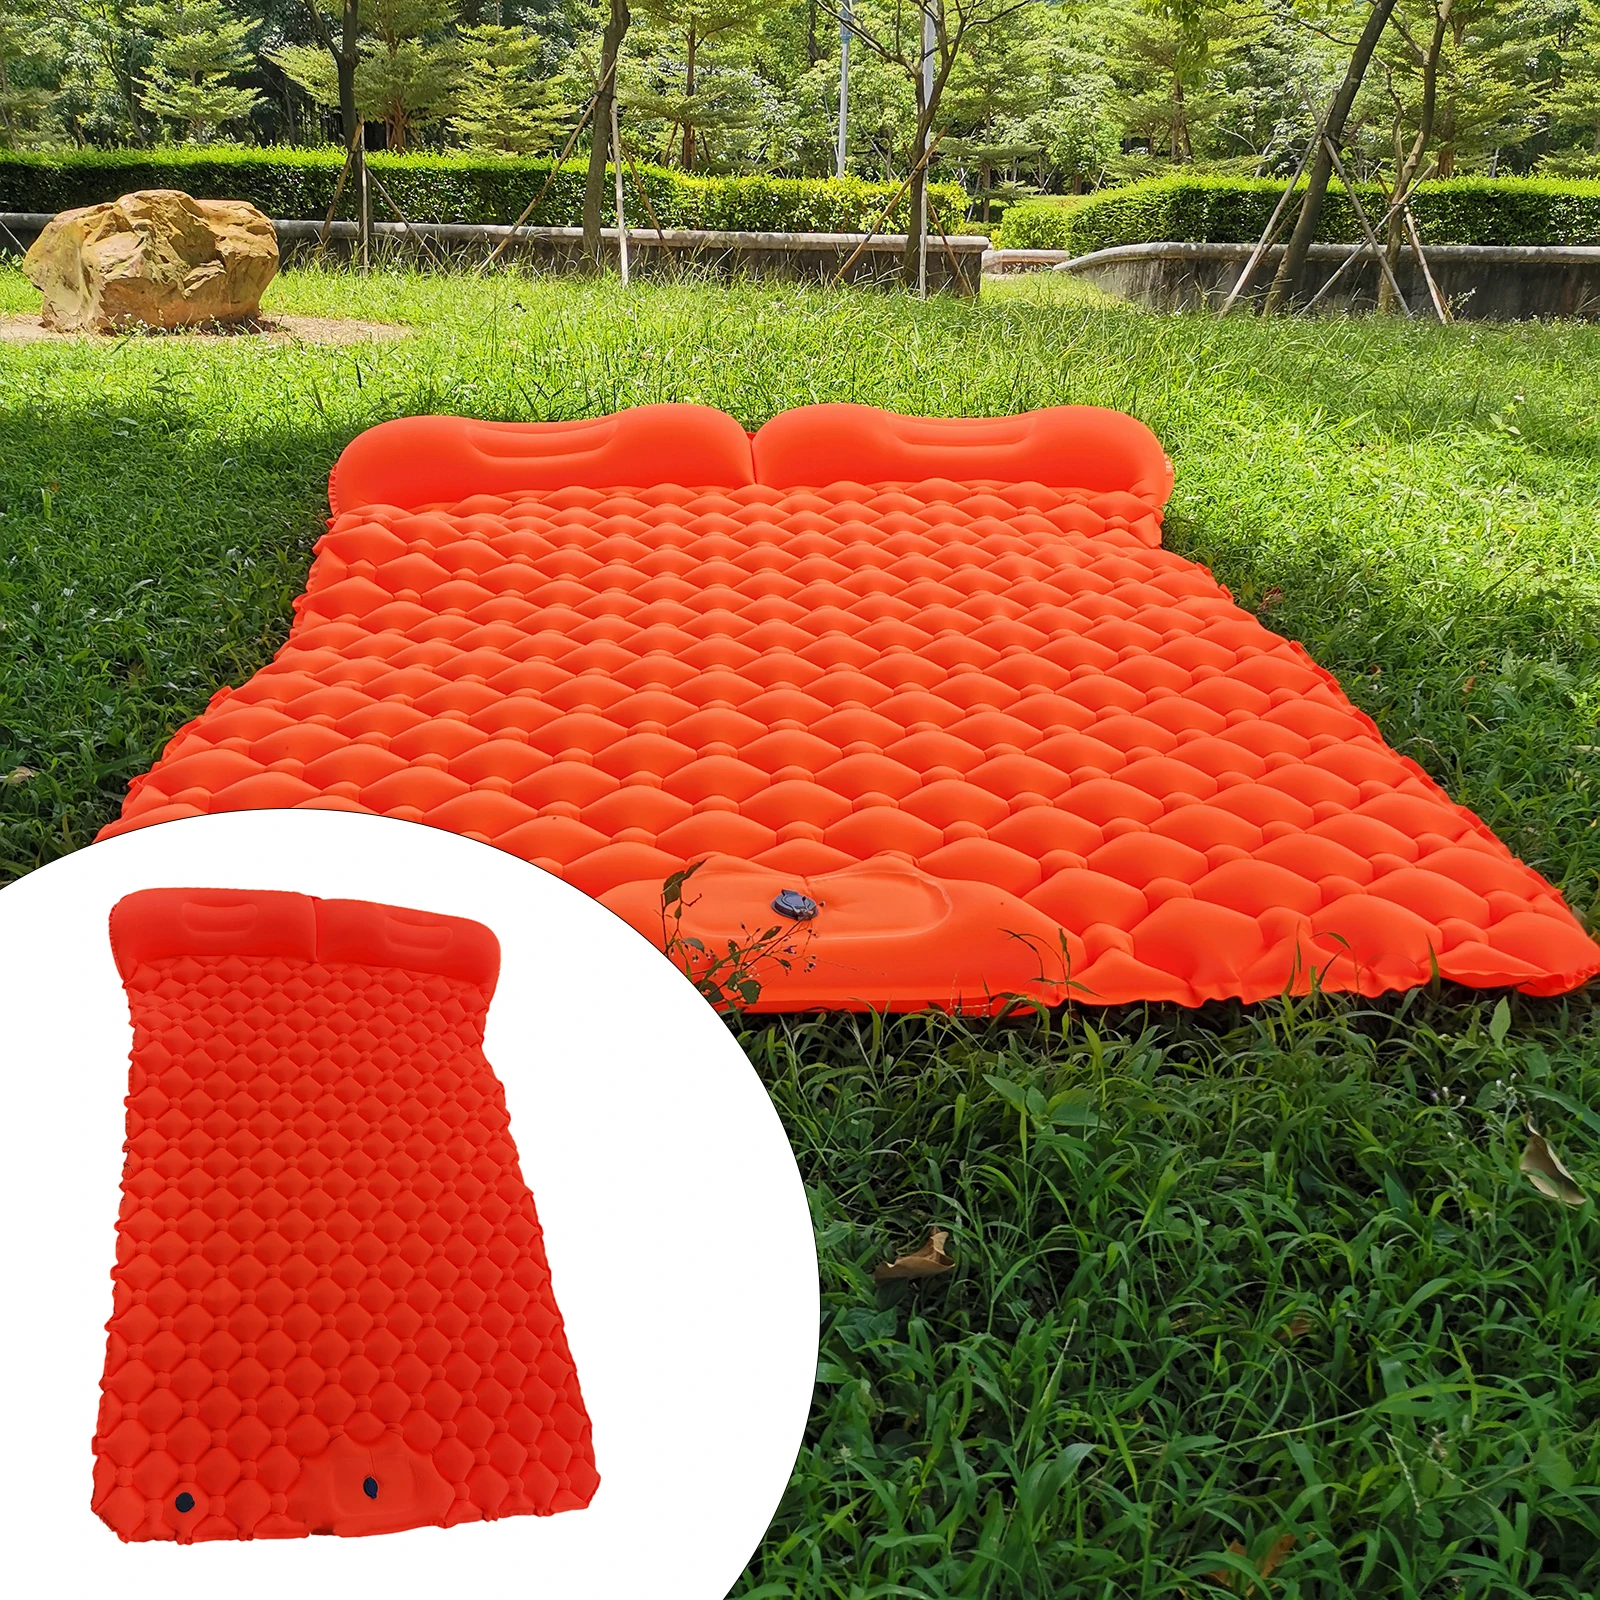 Sleeping Double Pad Inflatable Mat 2 Person Air Bed Cushion Mattress Hiking